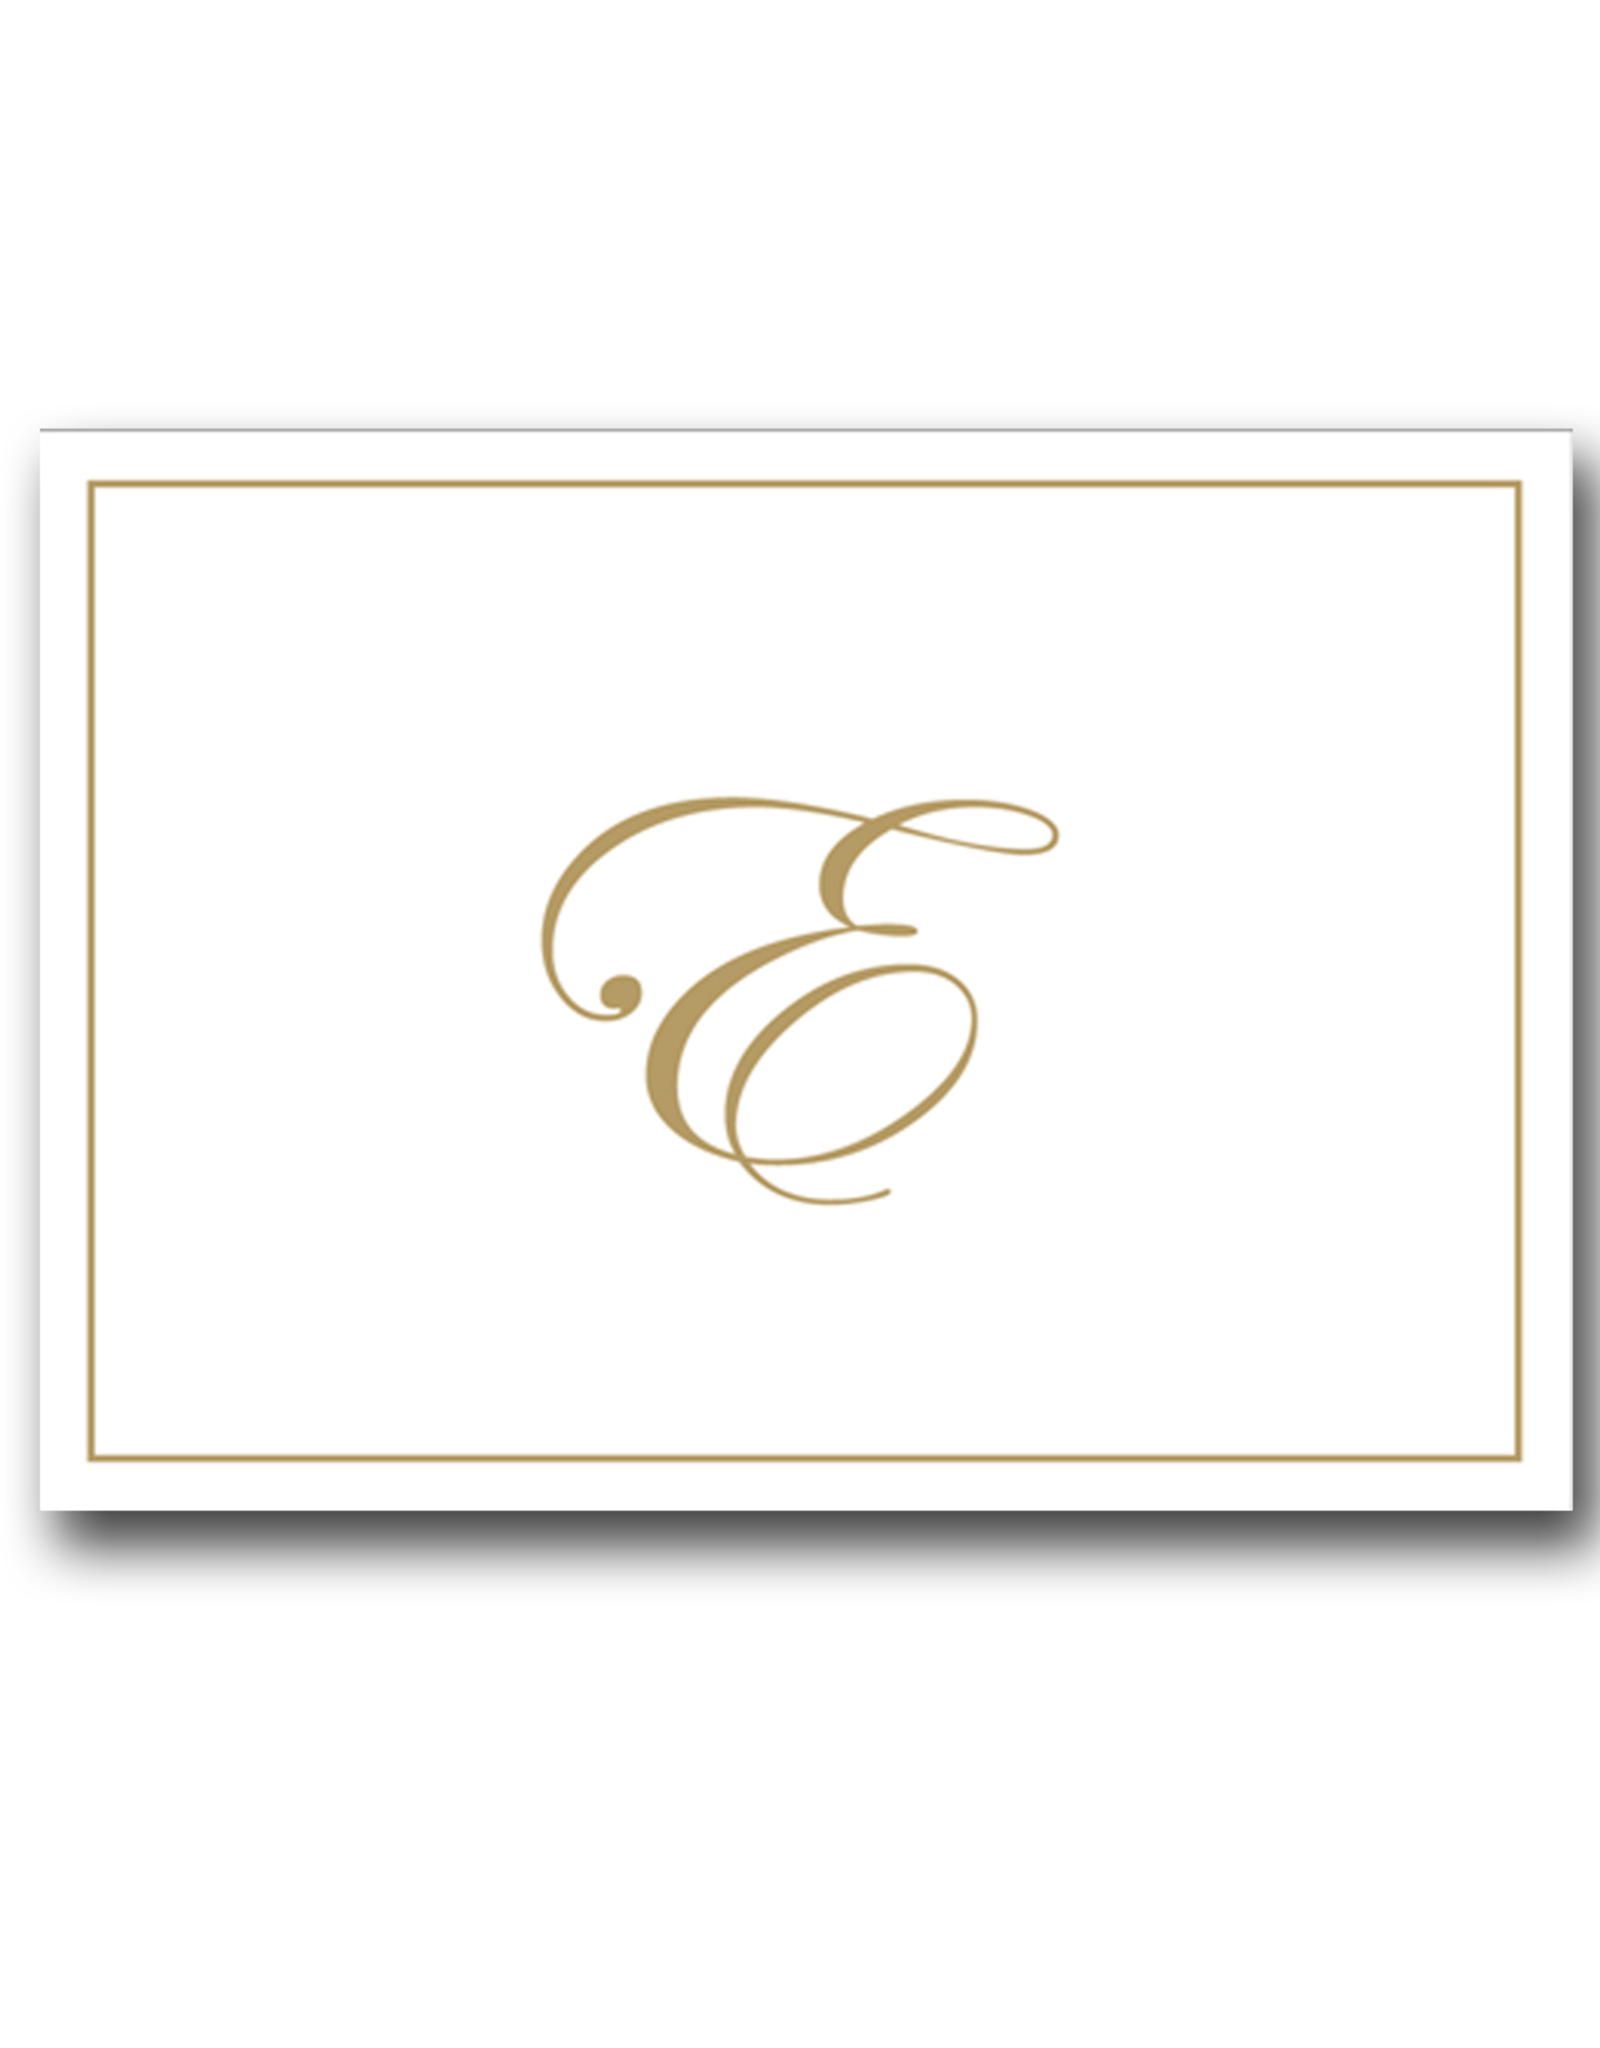 Caspari Gold Embossed Initial Note Cards Letter E Boxed Set of 8